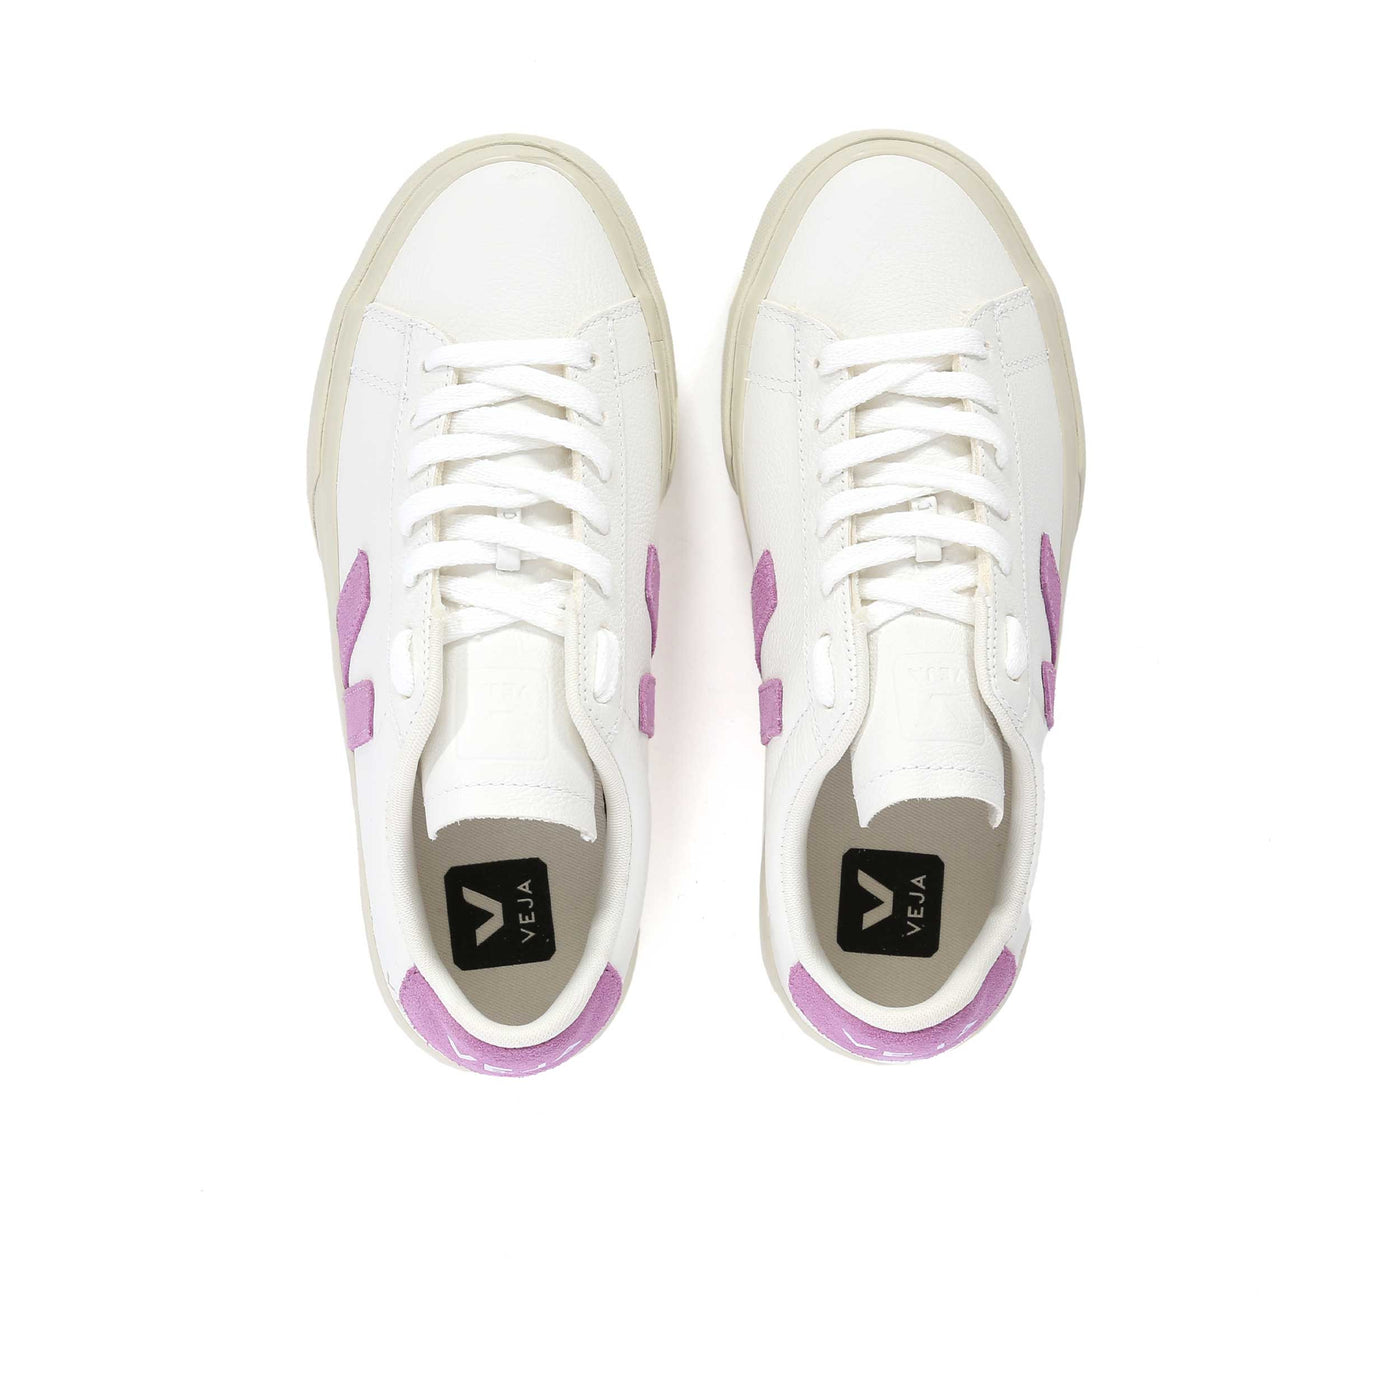 Veja Campo Ladies Trainer in Extra White & Mulberry Birdseye